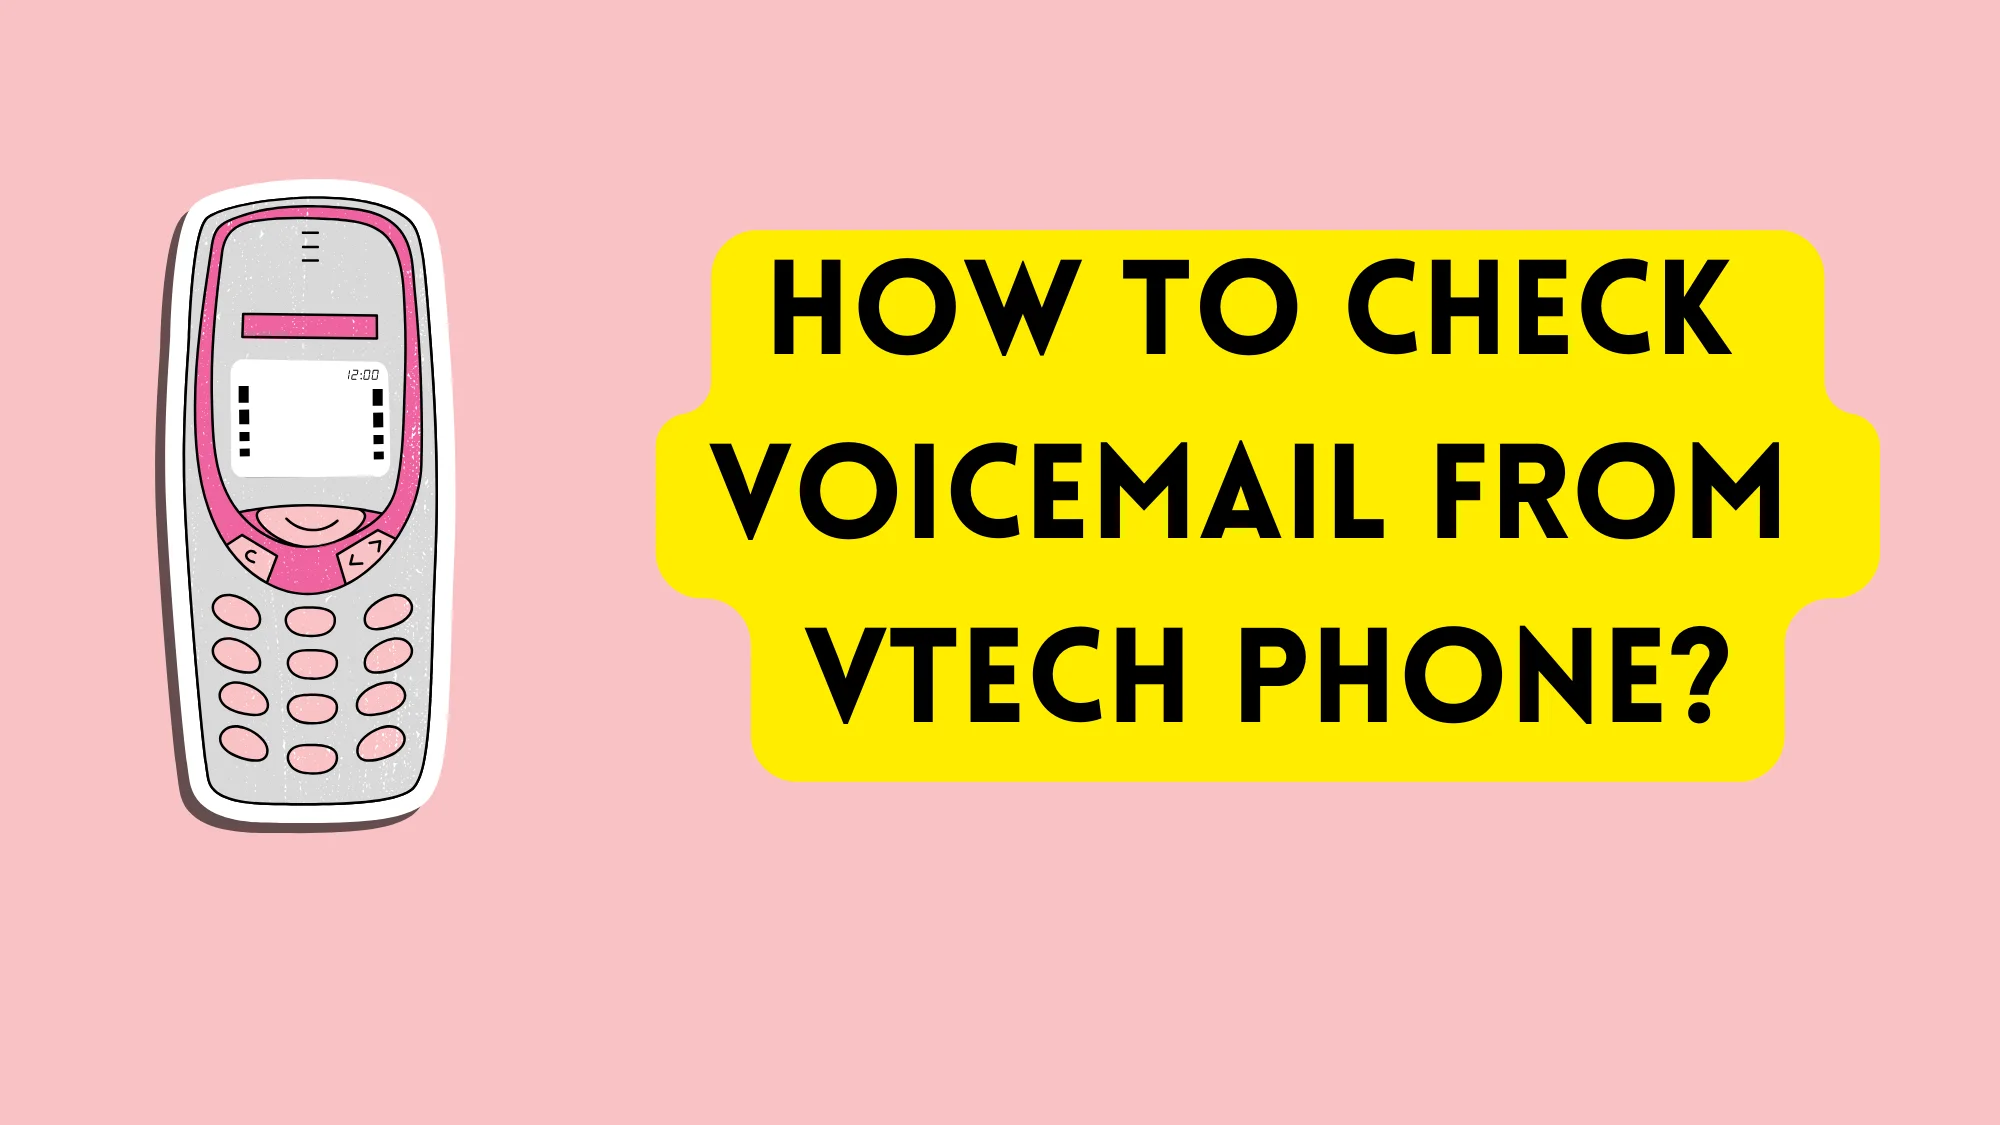 How to check voicemail from Vtech phone